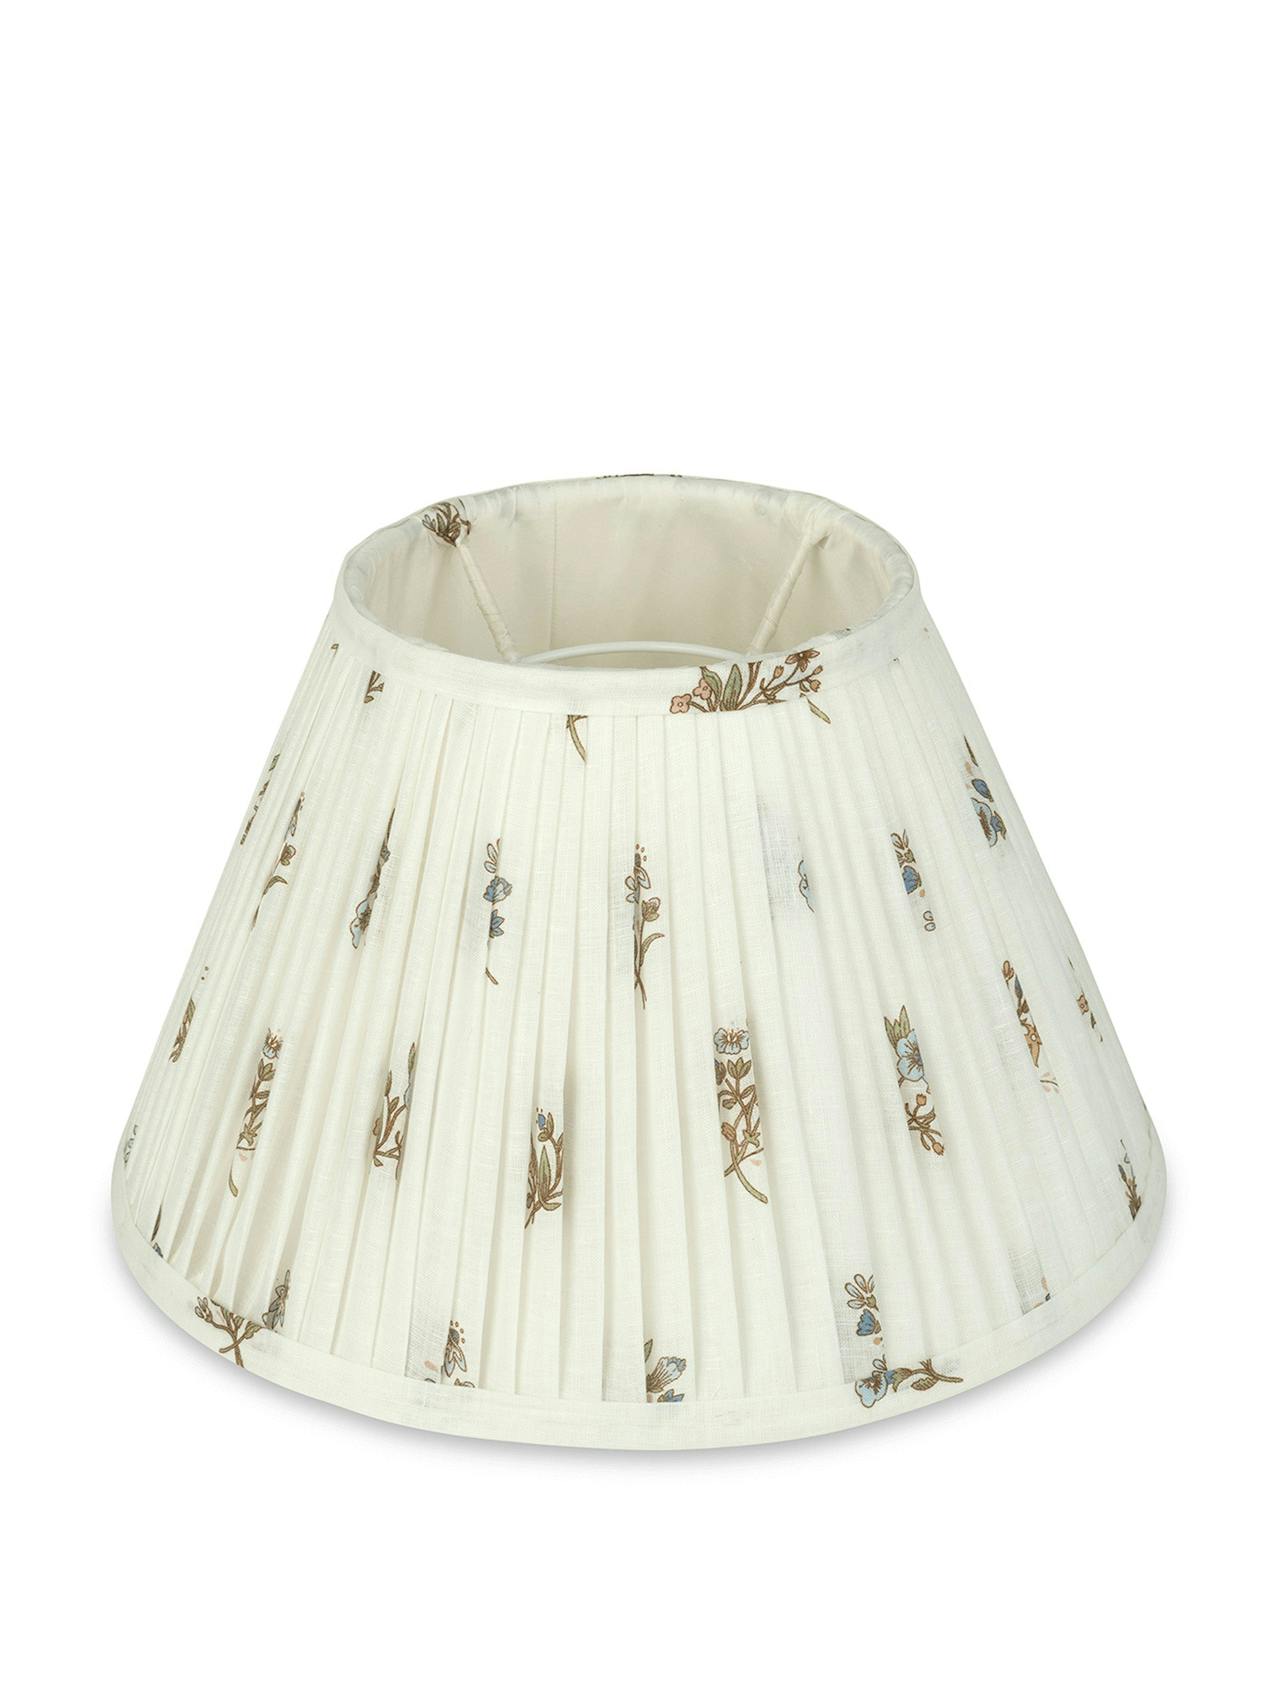 Hand pleated empire lampshade in printed voile